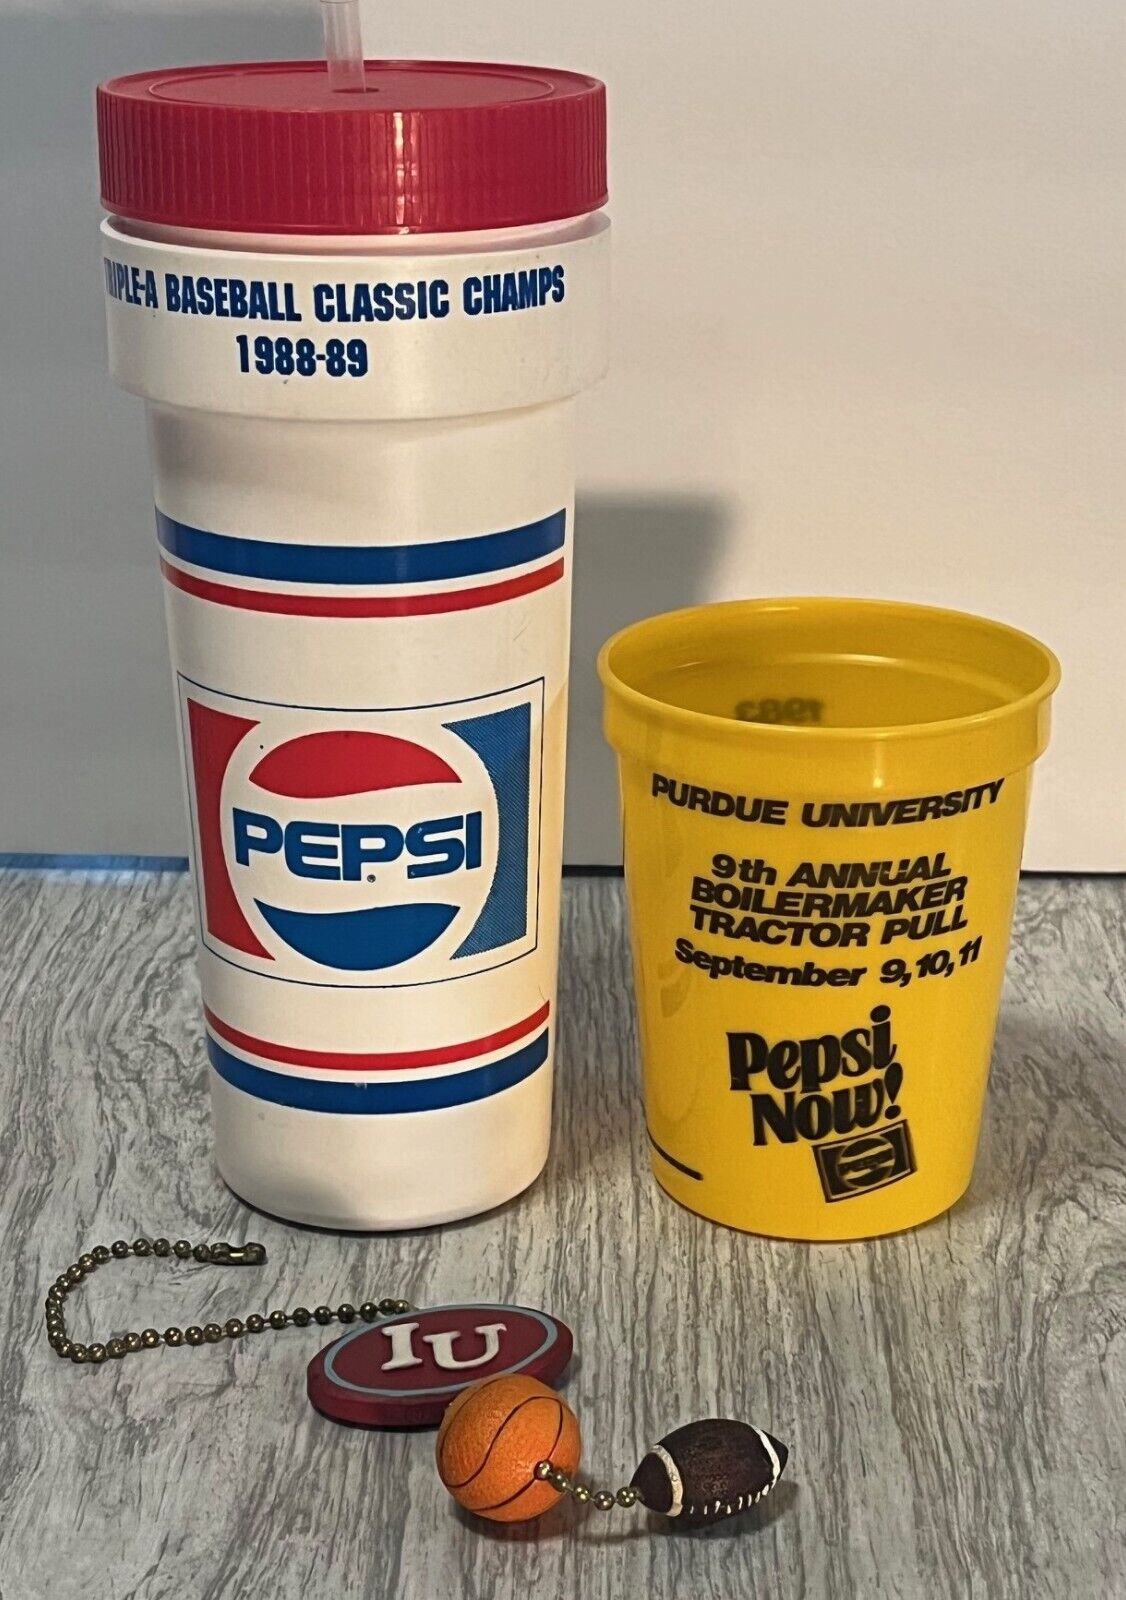 PEPSI INDIANAPOLIS INDIANS BOTTLE   IU PULL CHAIN   PURDUE CUP